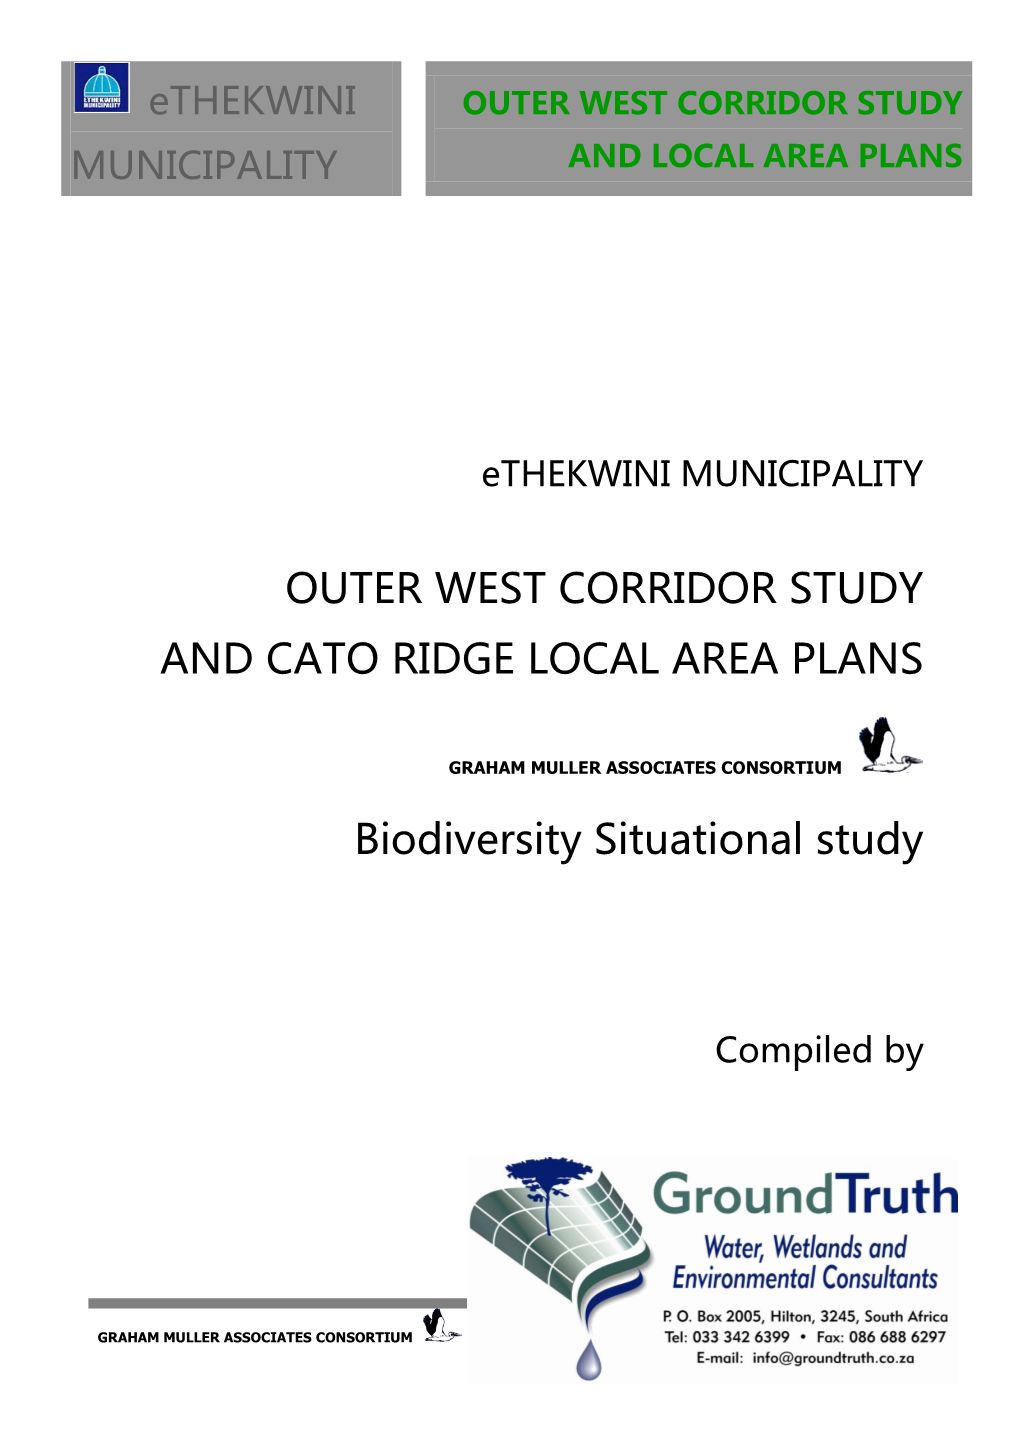 Outer West Corridor Study and Local Area Plans